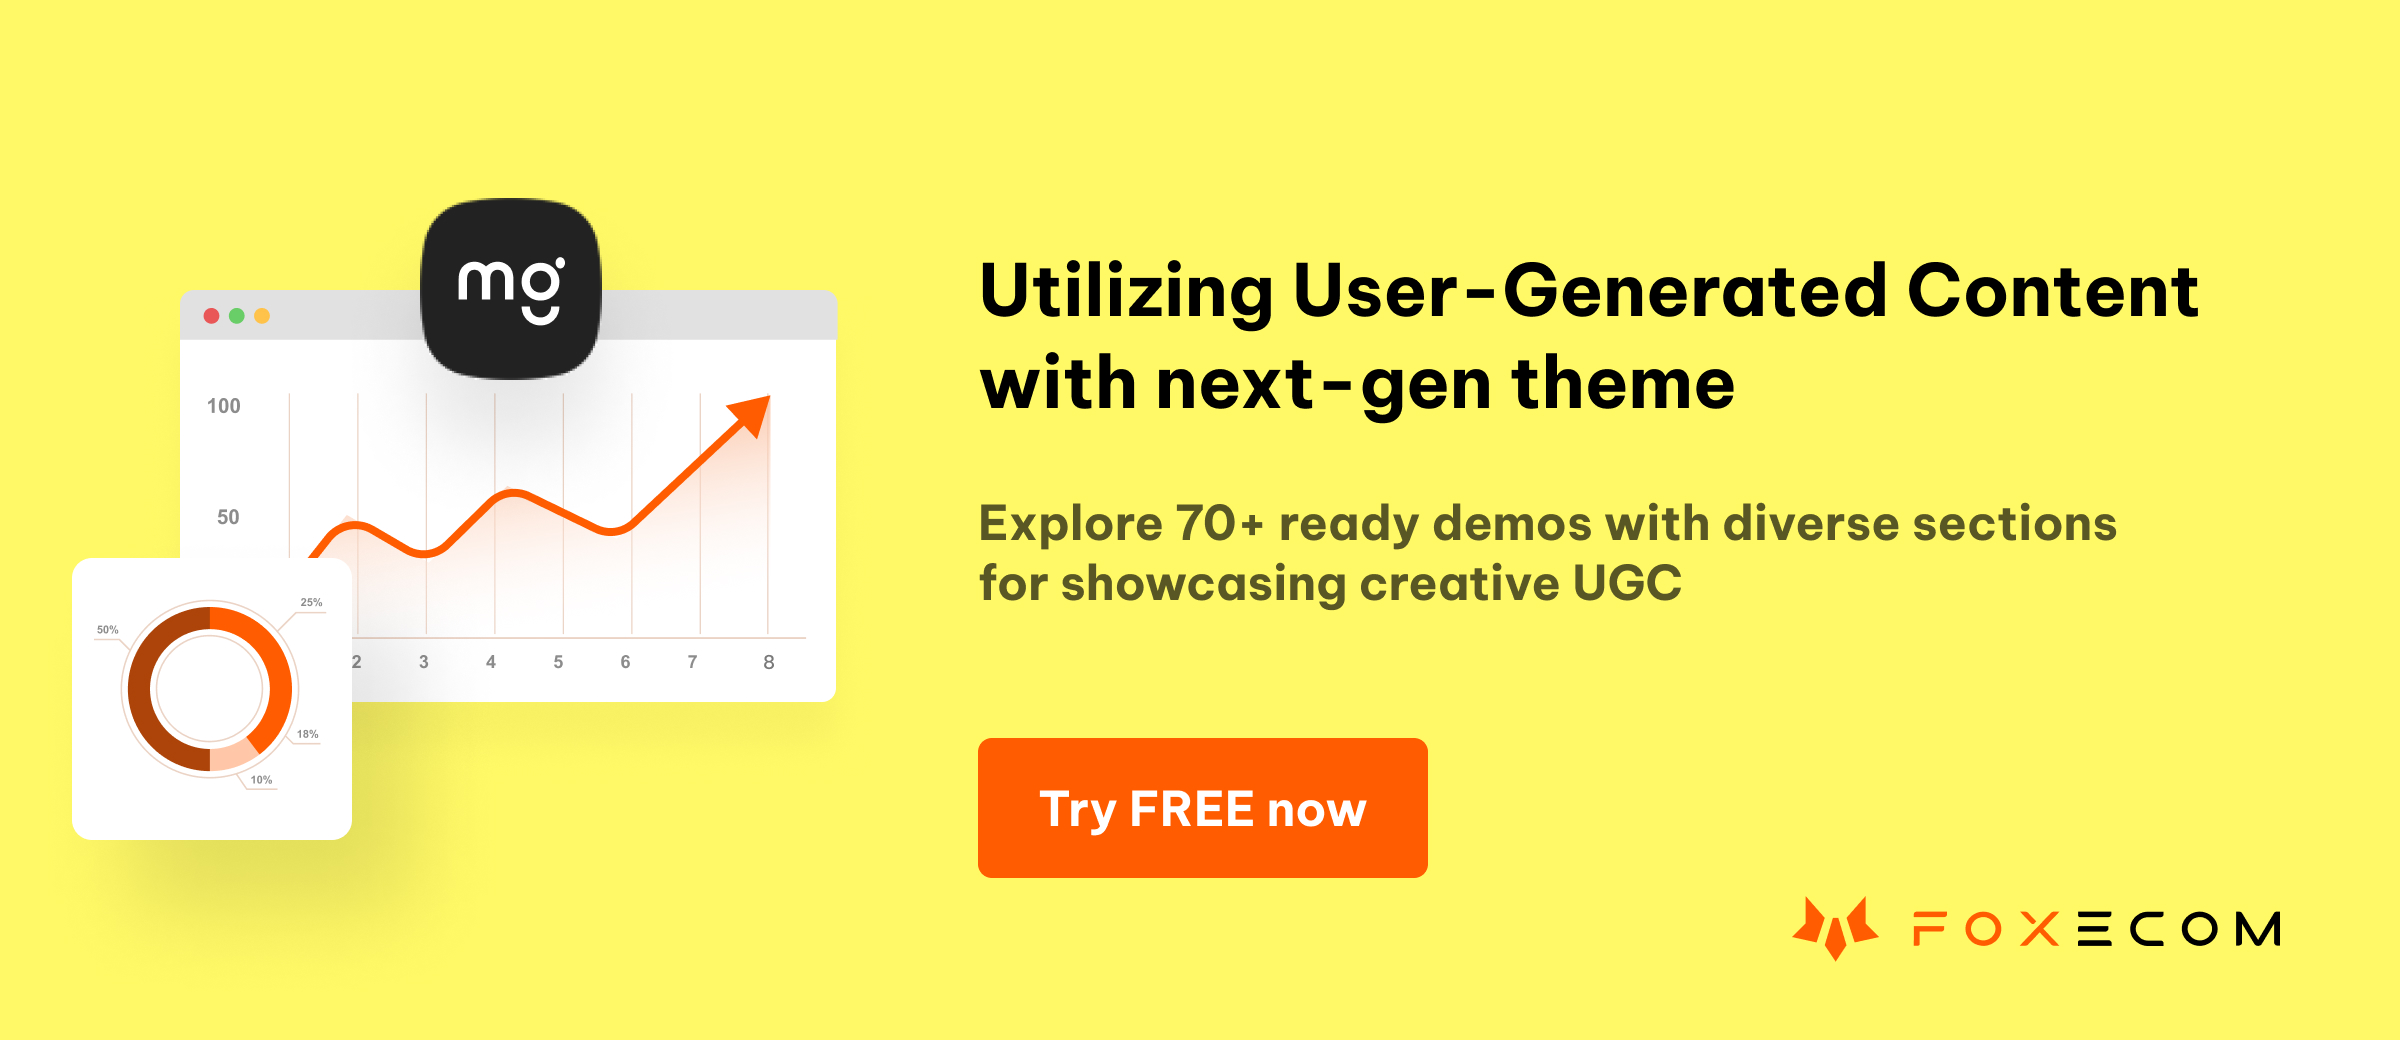 Try next-gen theme User generated content for free now